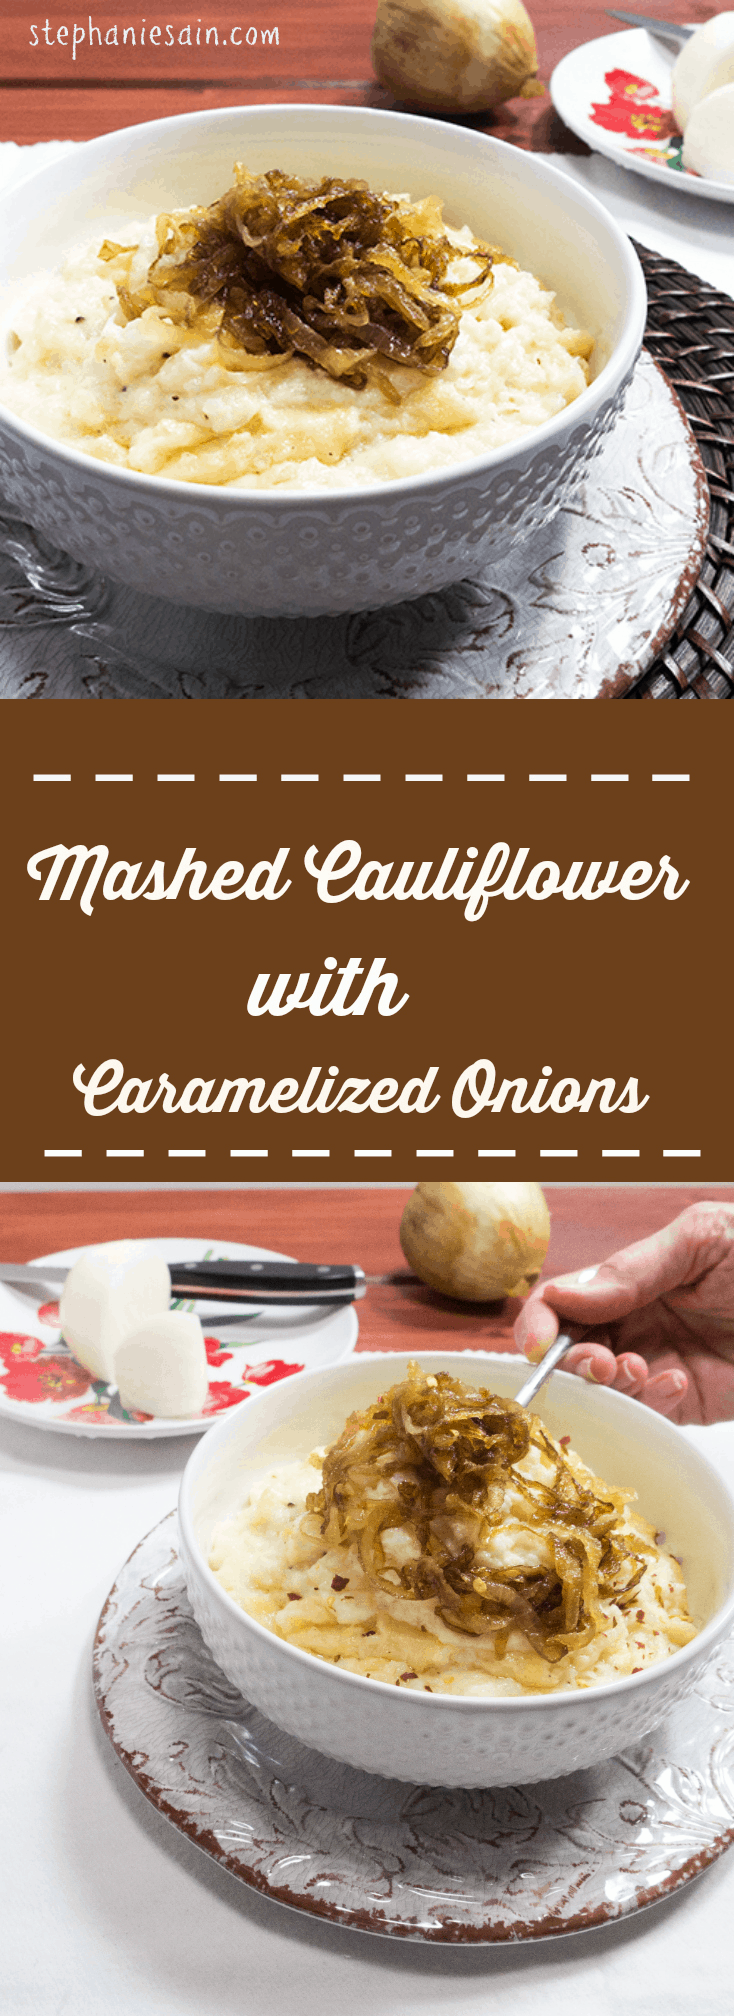 Mashed Cauliflower with Caramelized Onions is a lower carb tasty option for mashed potatoes. Vegetarian and Gluten Free.